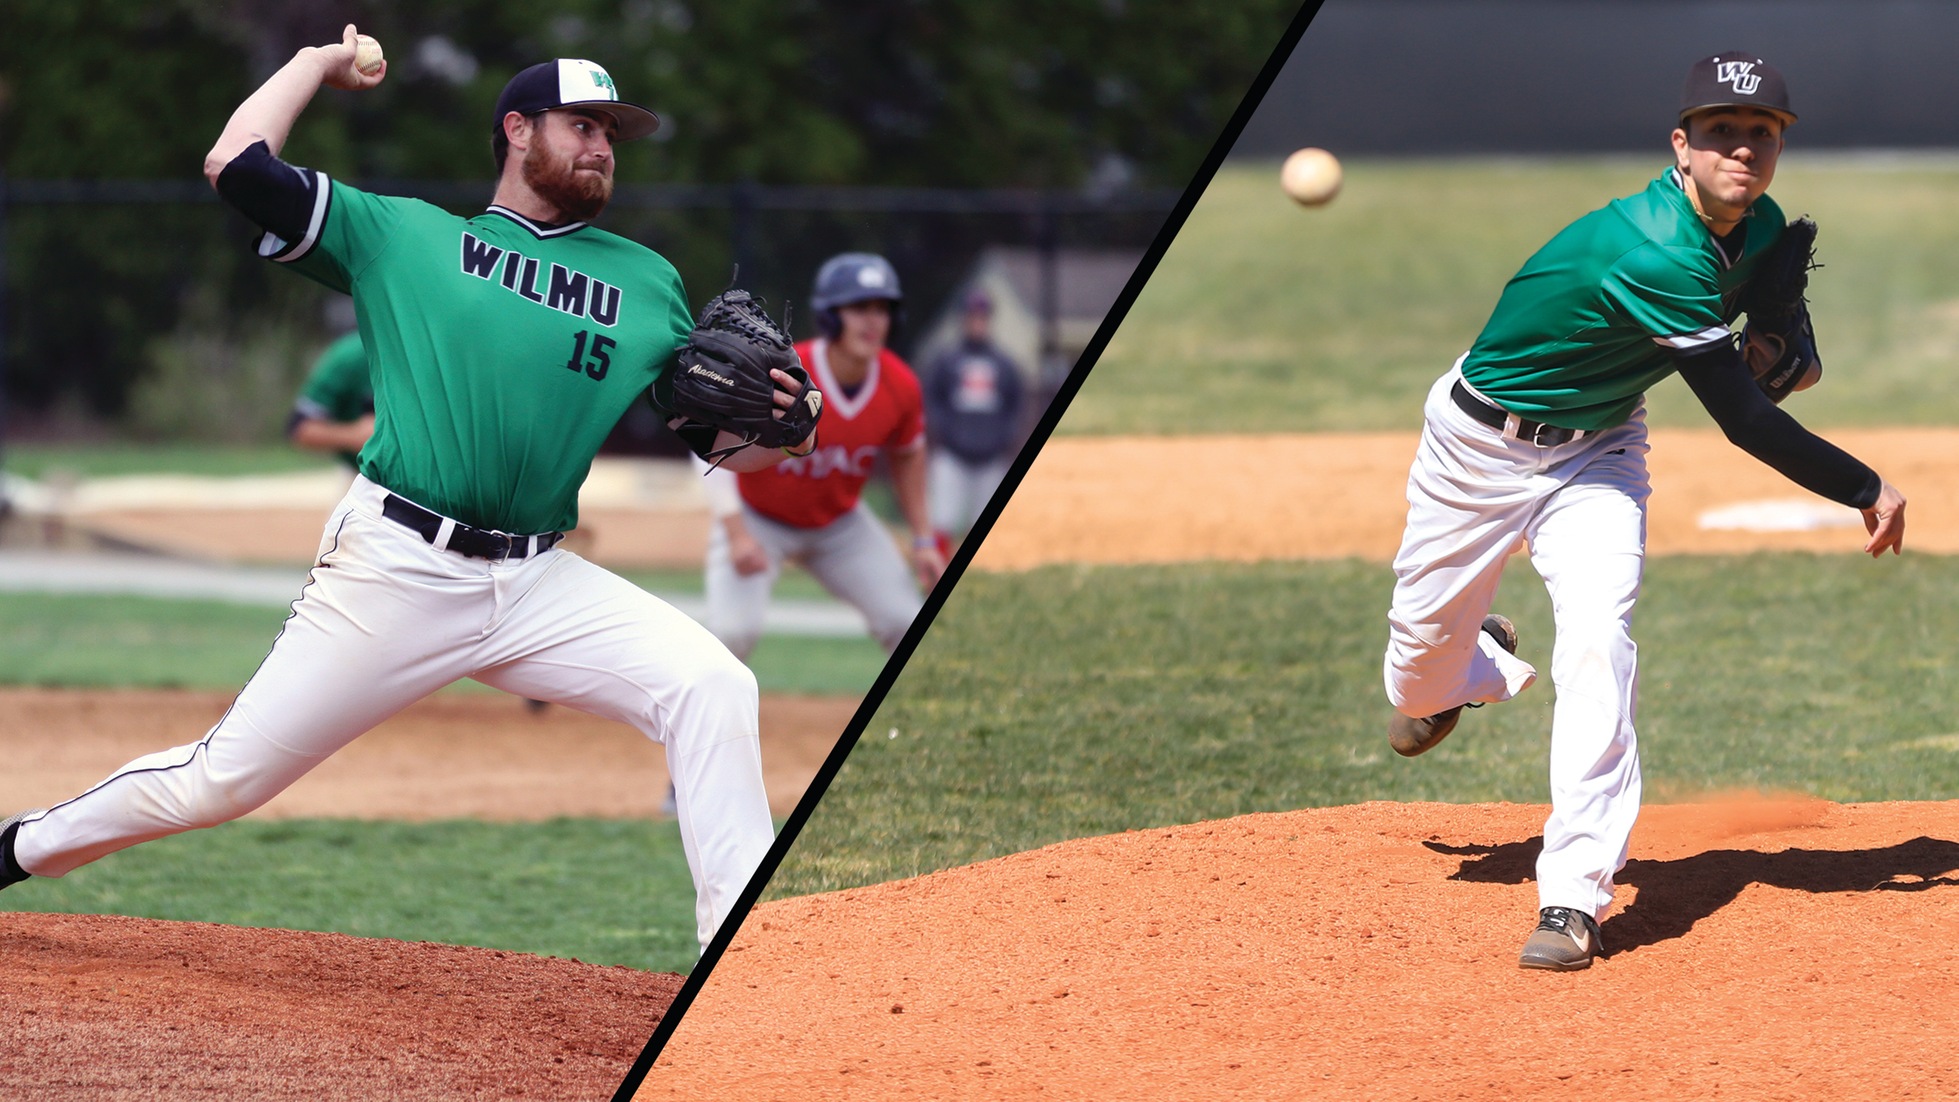 Deely and Maxwell Dominant on the Mound in Back-to-Back Shutouts Over Nyack, 3-0 and 5-0